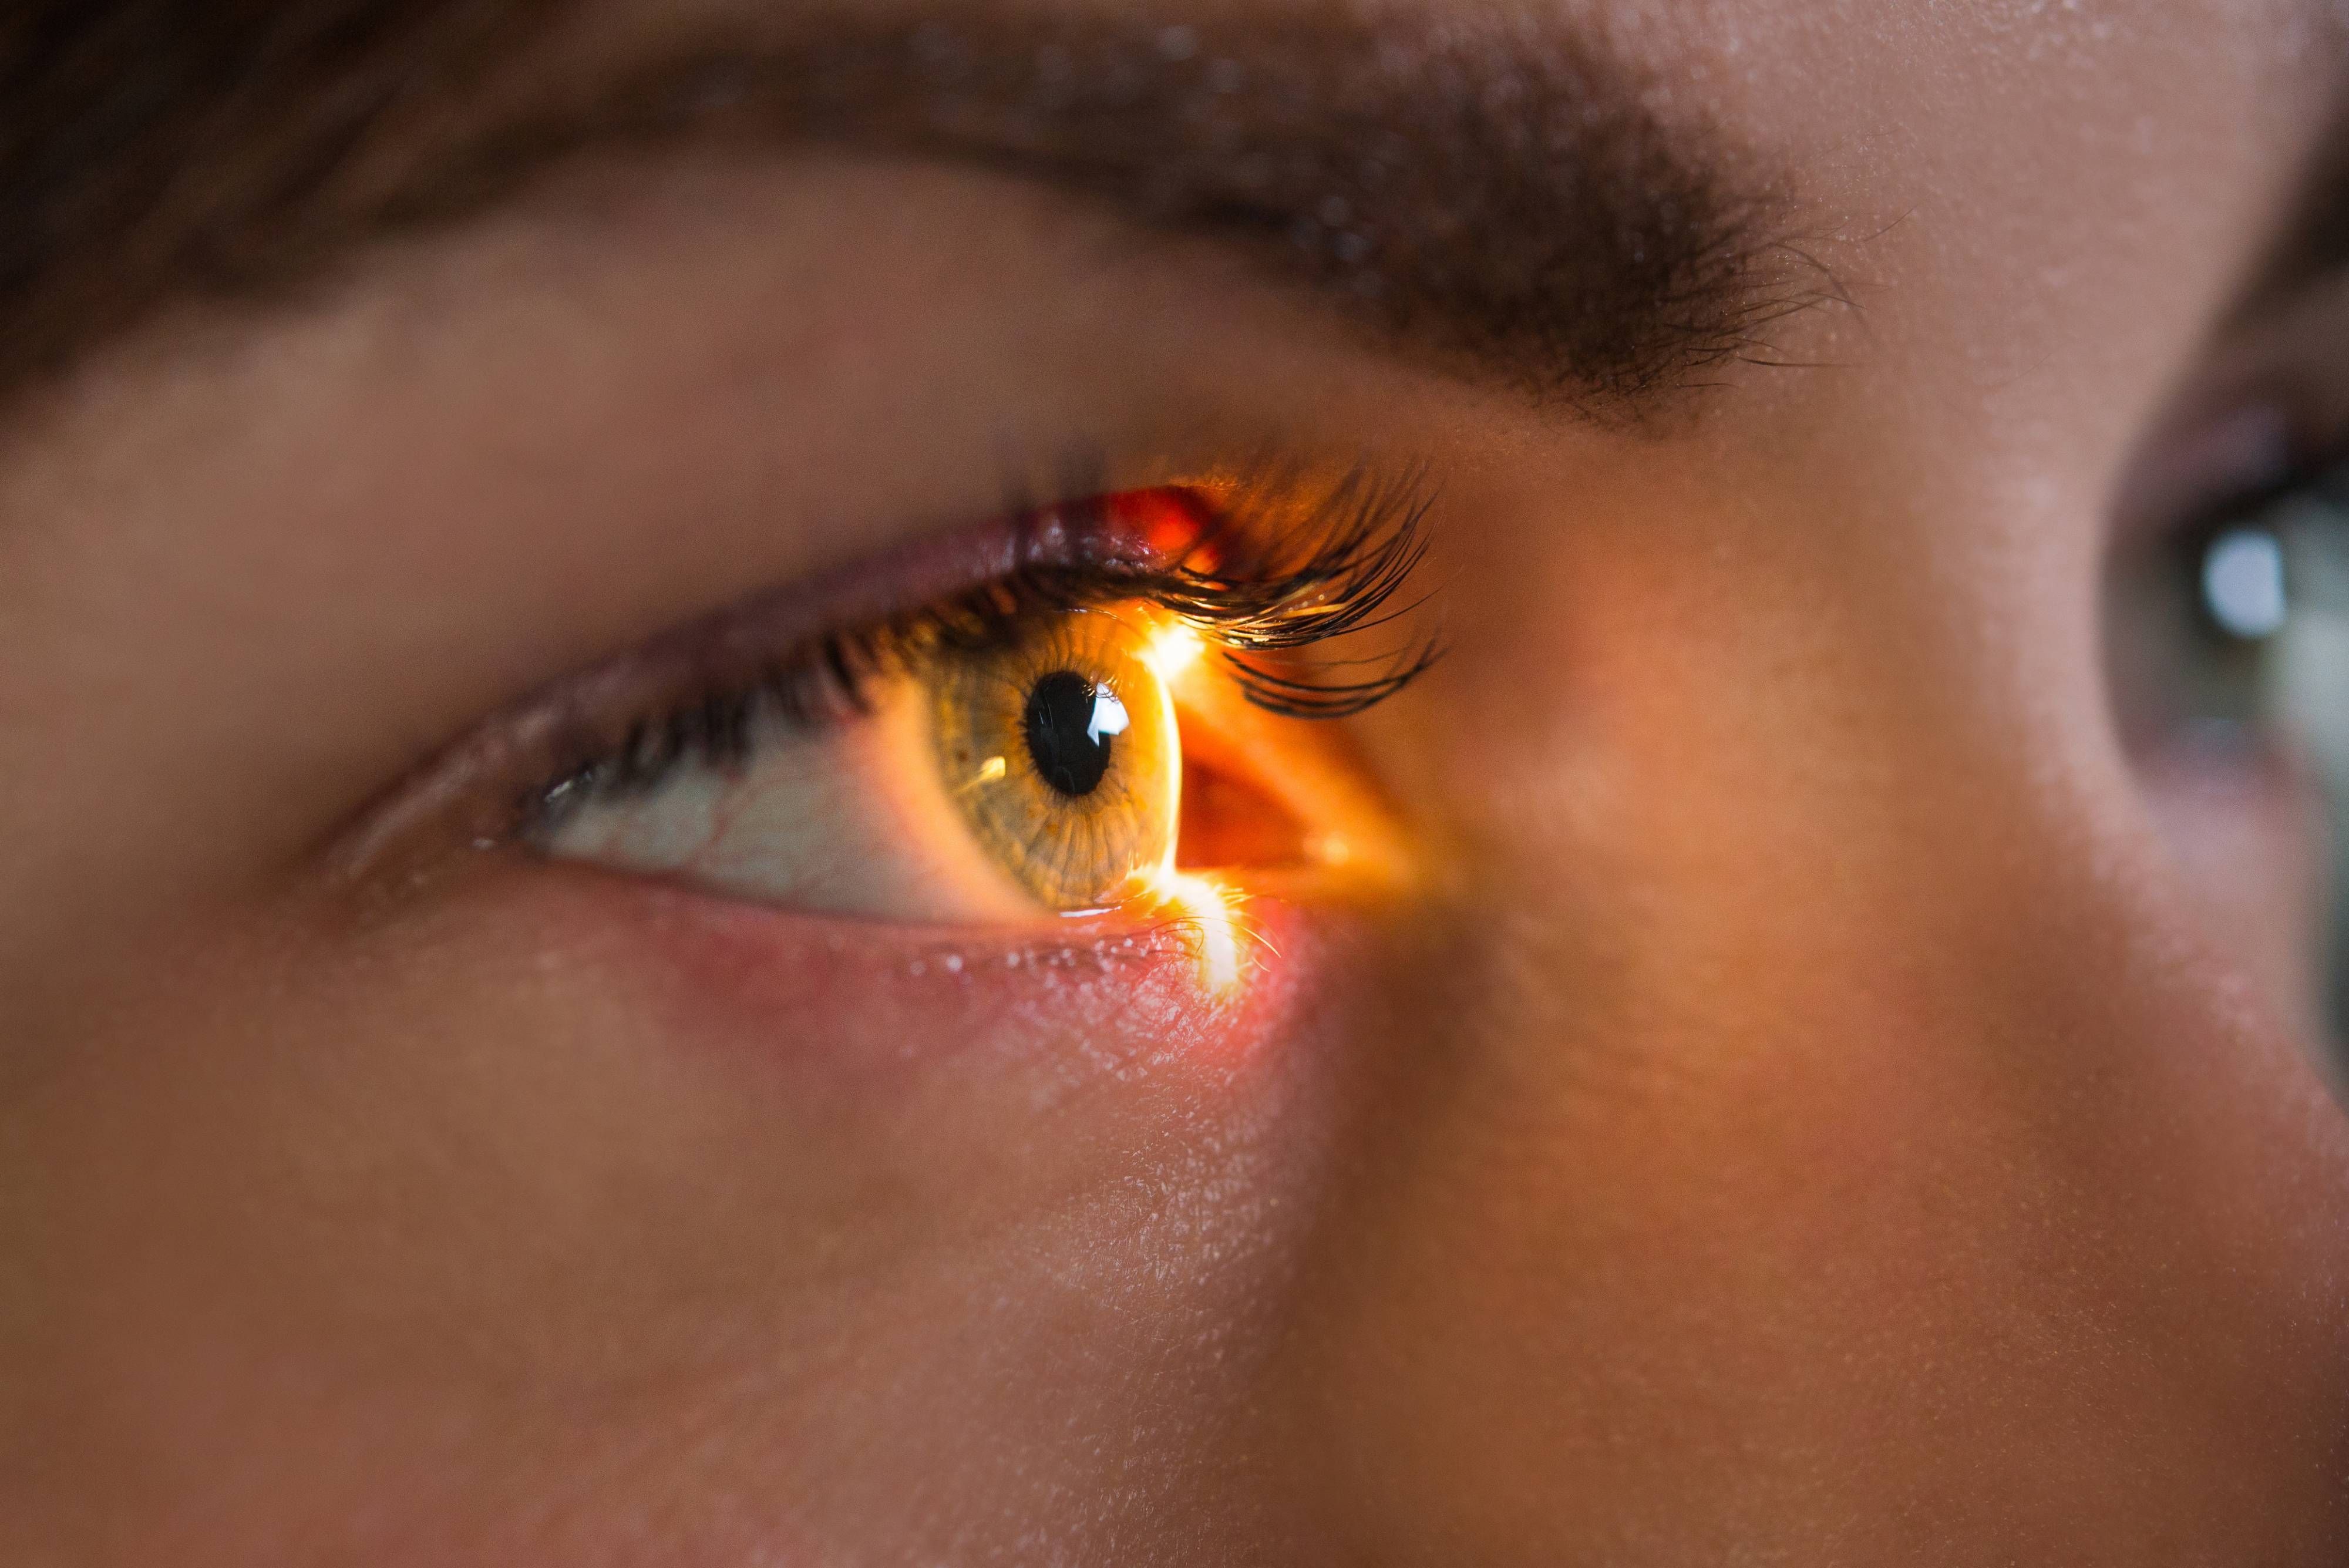 Benefits of Low-Level Light Therapy for Treating Dry Eye